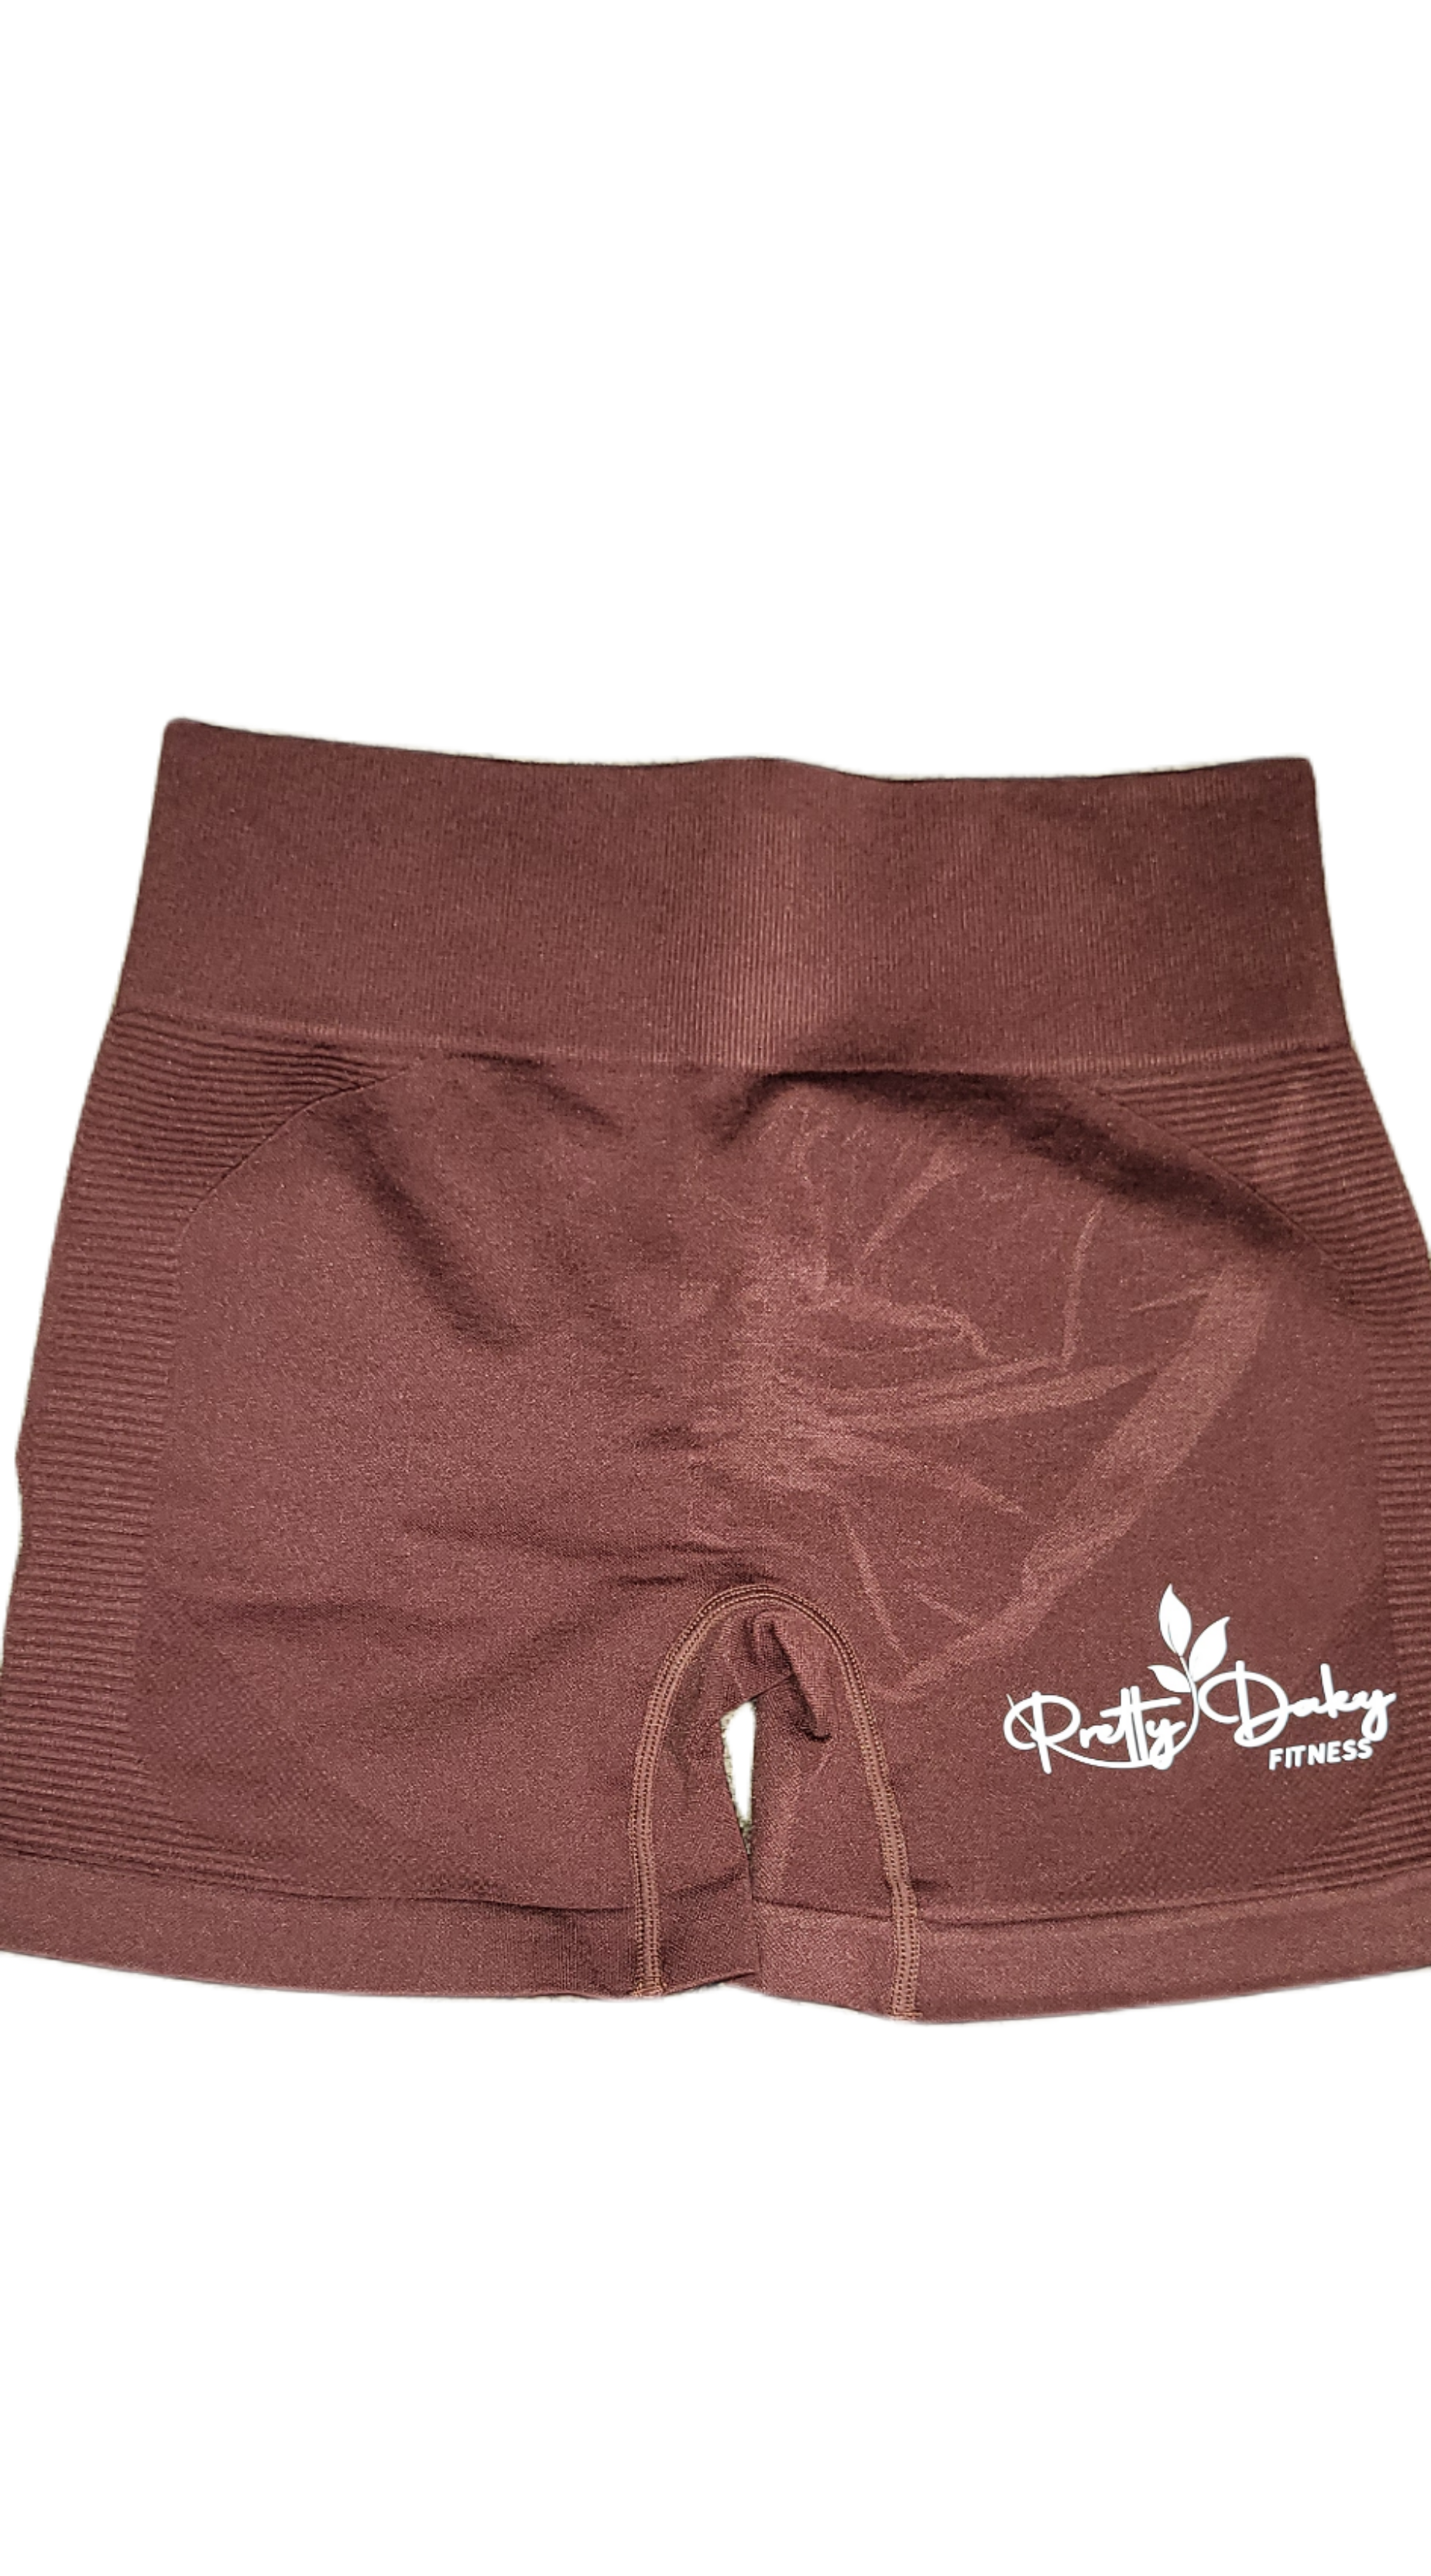 Chocolate Brown Butt Lifting High Waisted Workout Shorts – PrettyDaky